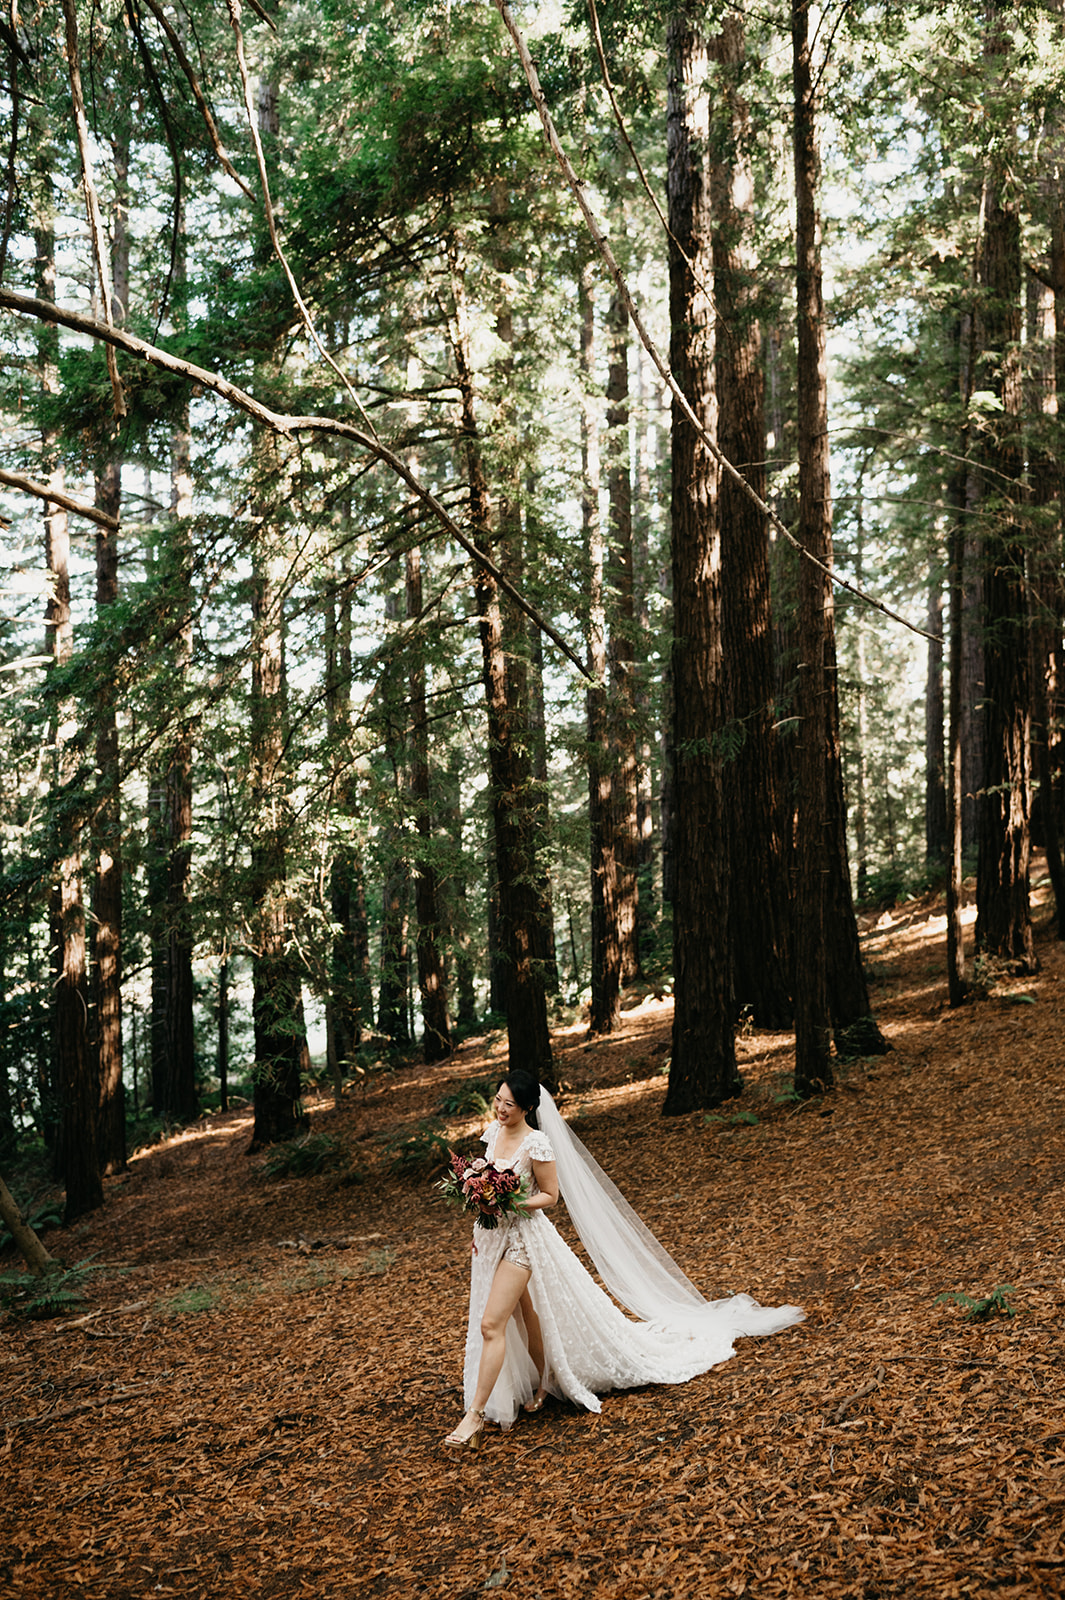 Bride in wedding dress walks to ceremony site in the forest of Big Sur, California.